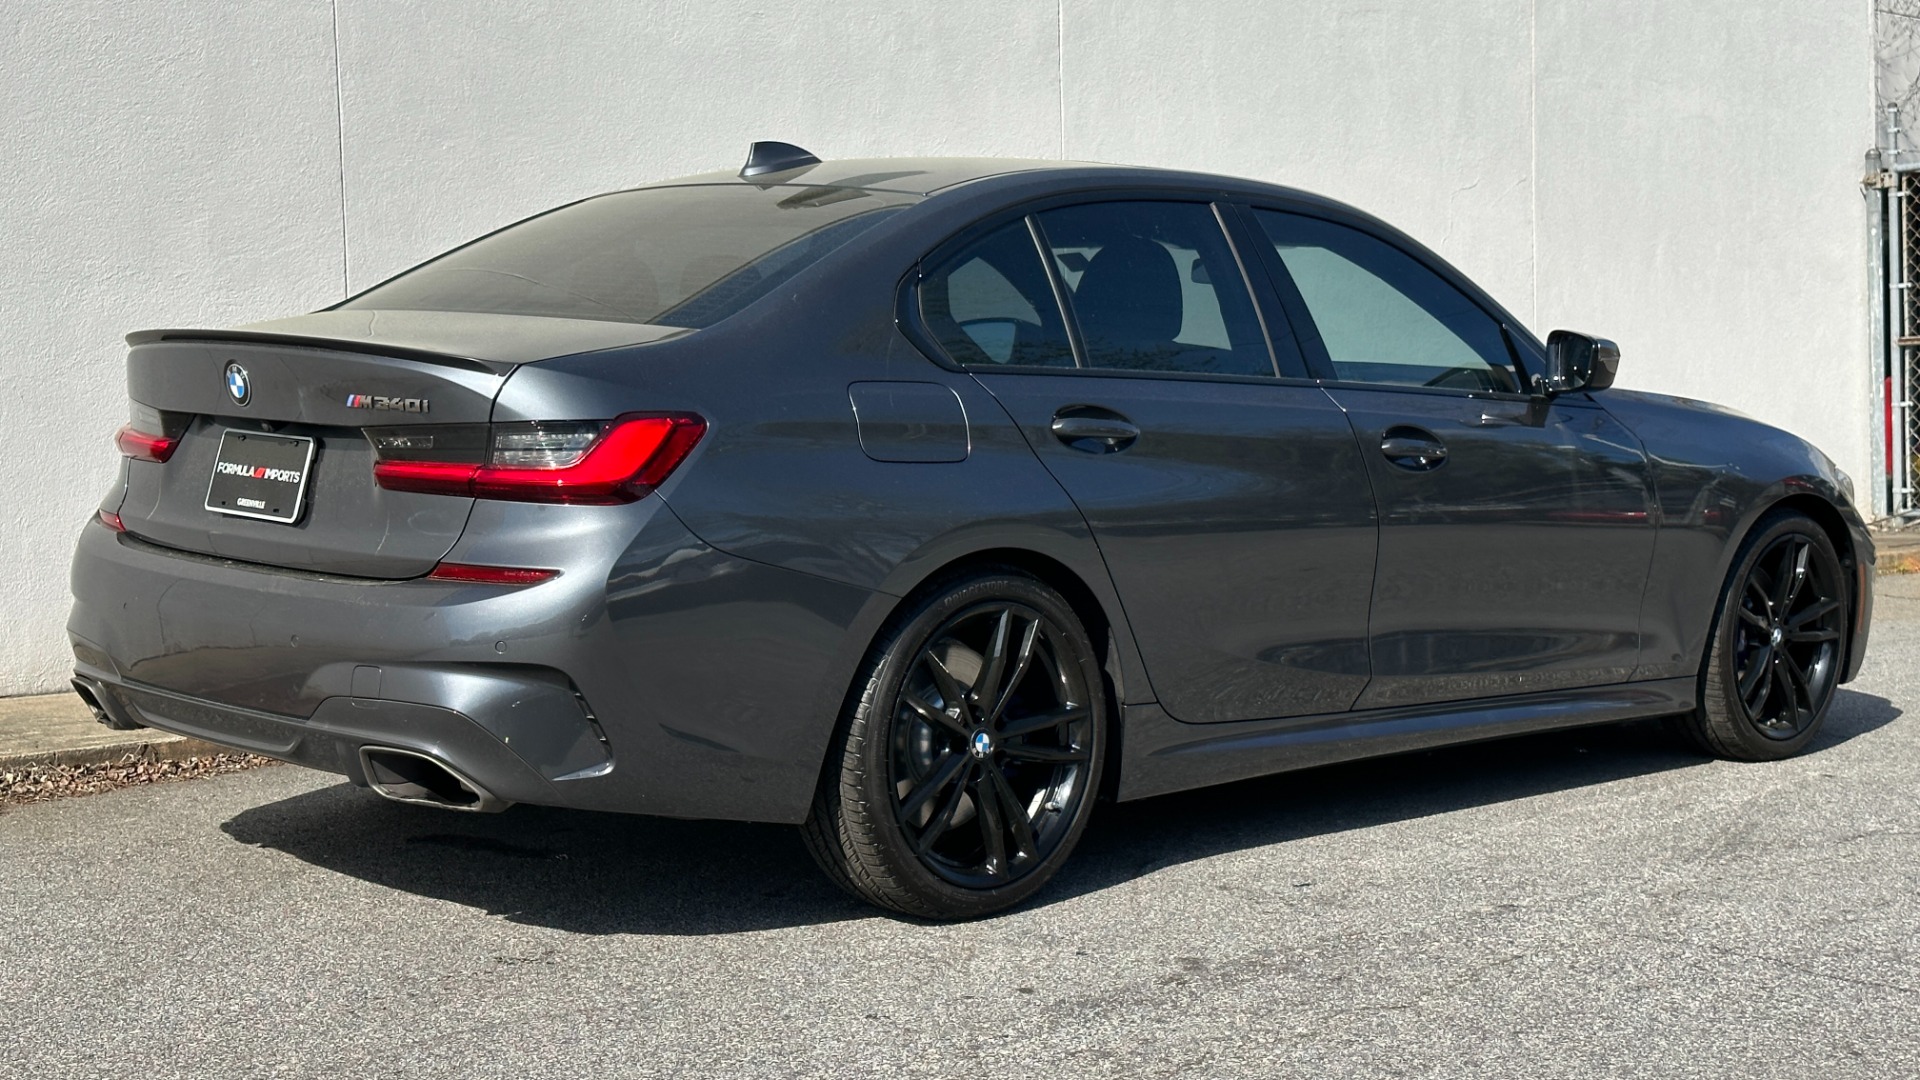 Used 2020 BMW 3 Series M340i / 19IN WHEELS / DRIVER ASSIST / HEATED SEATS / PARKING SENSORS for sale $45,995 at Formula Imports in Charlotte NC 28227 7